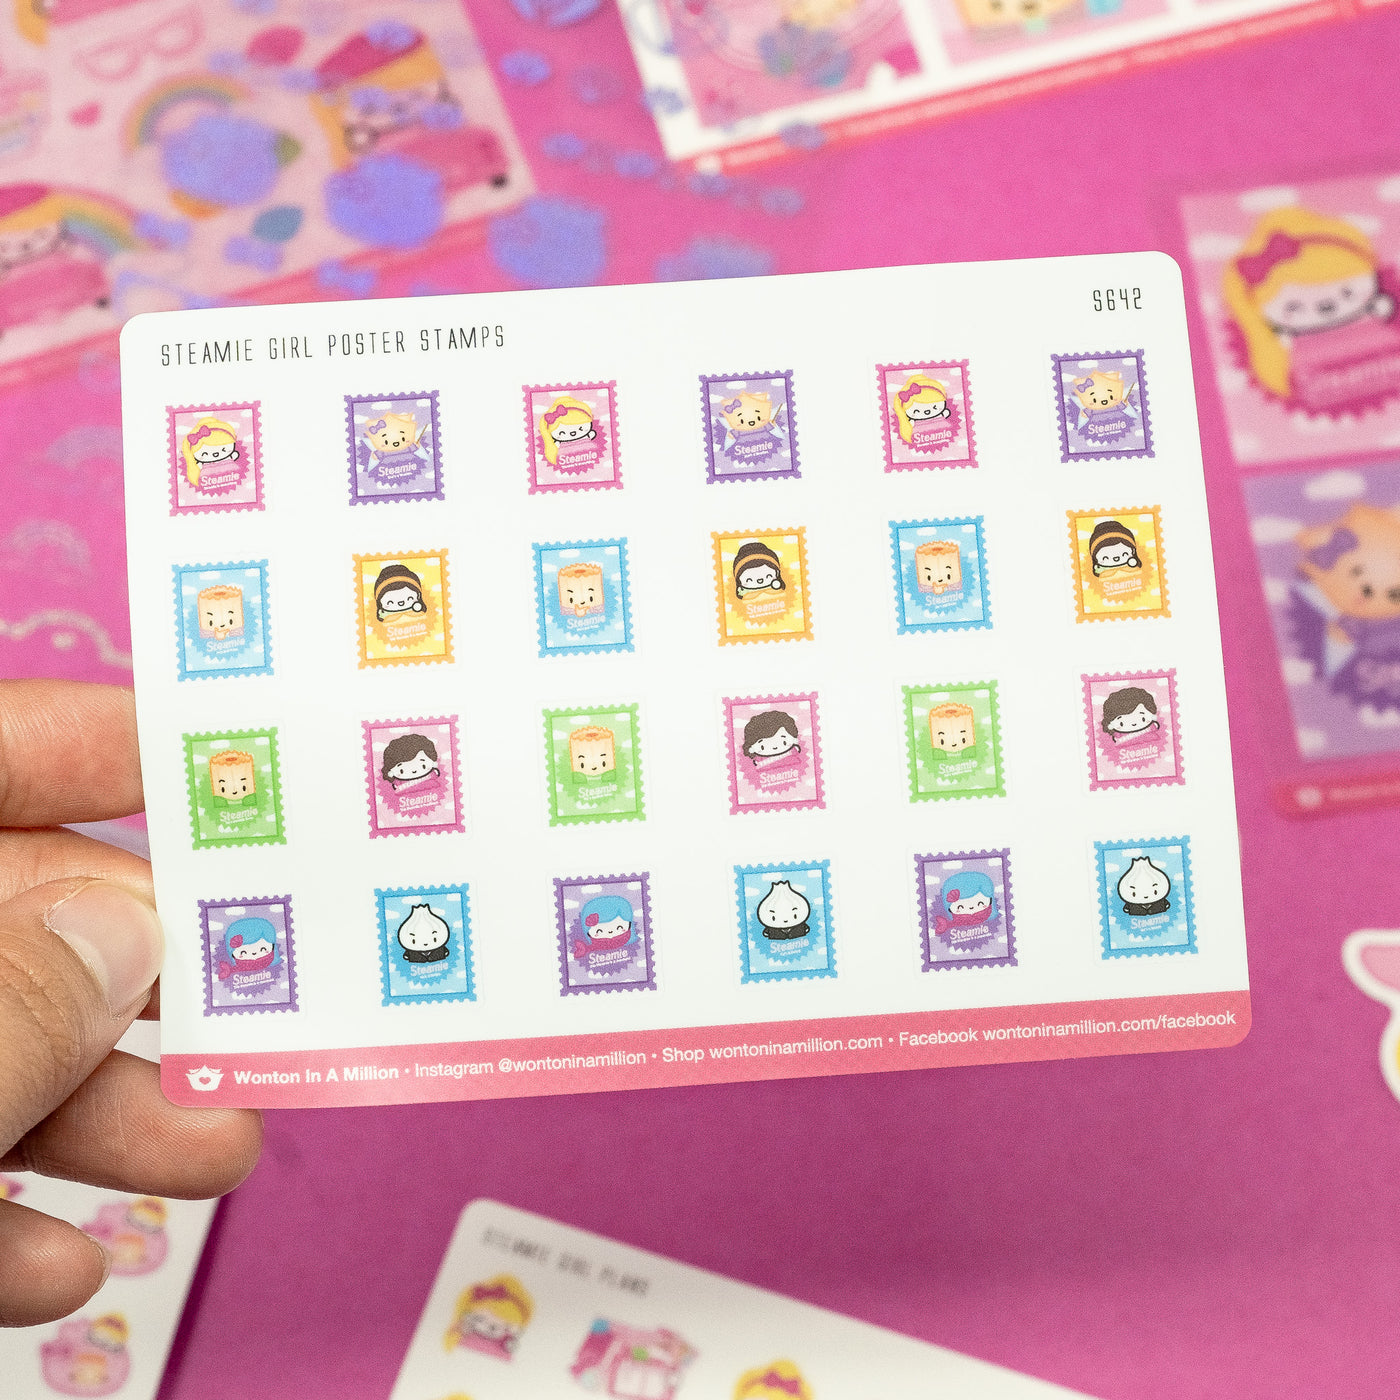 Steamie Girl Poster Stamps Stickers